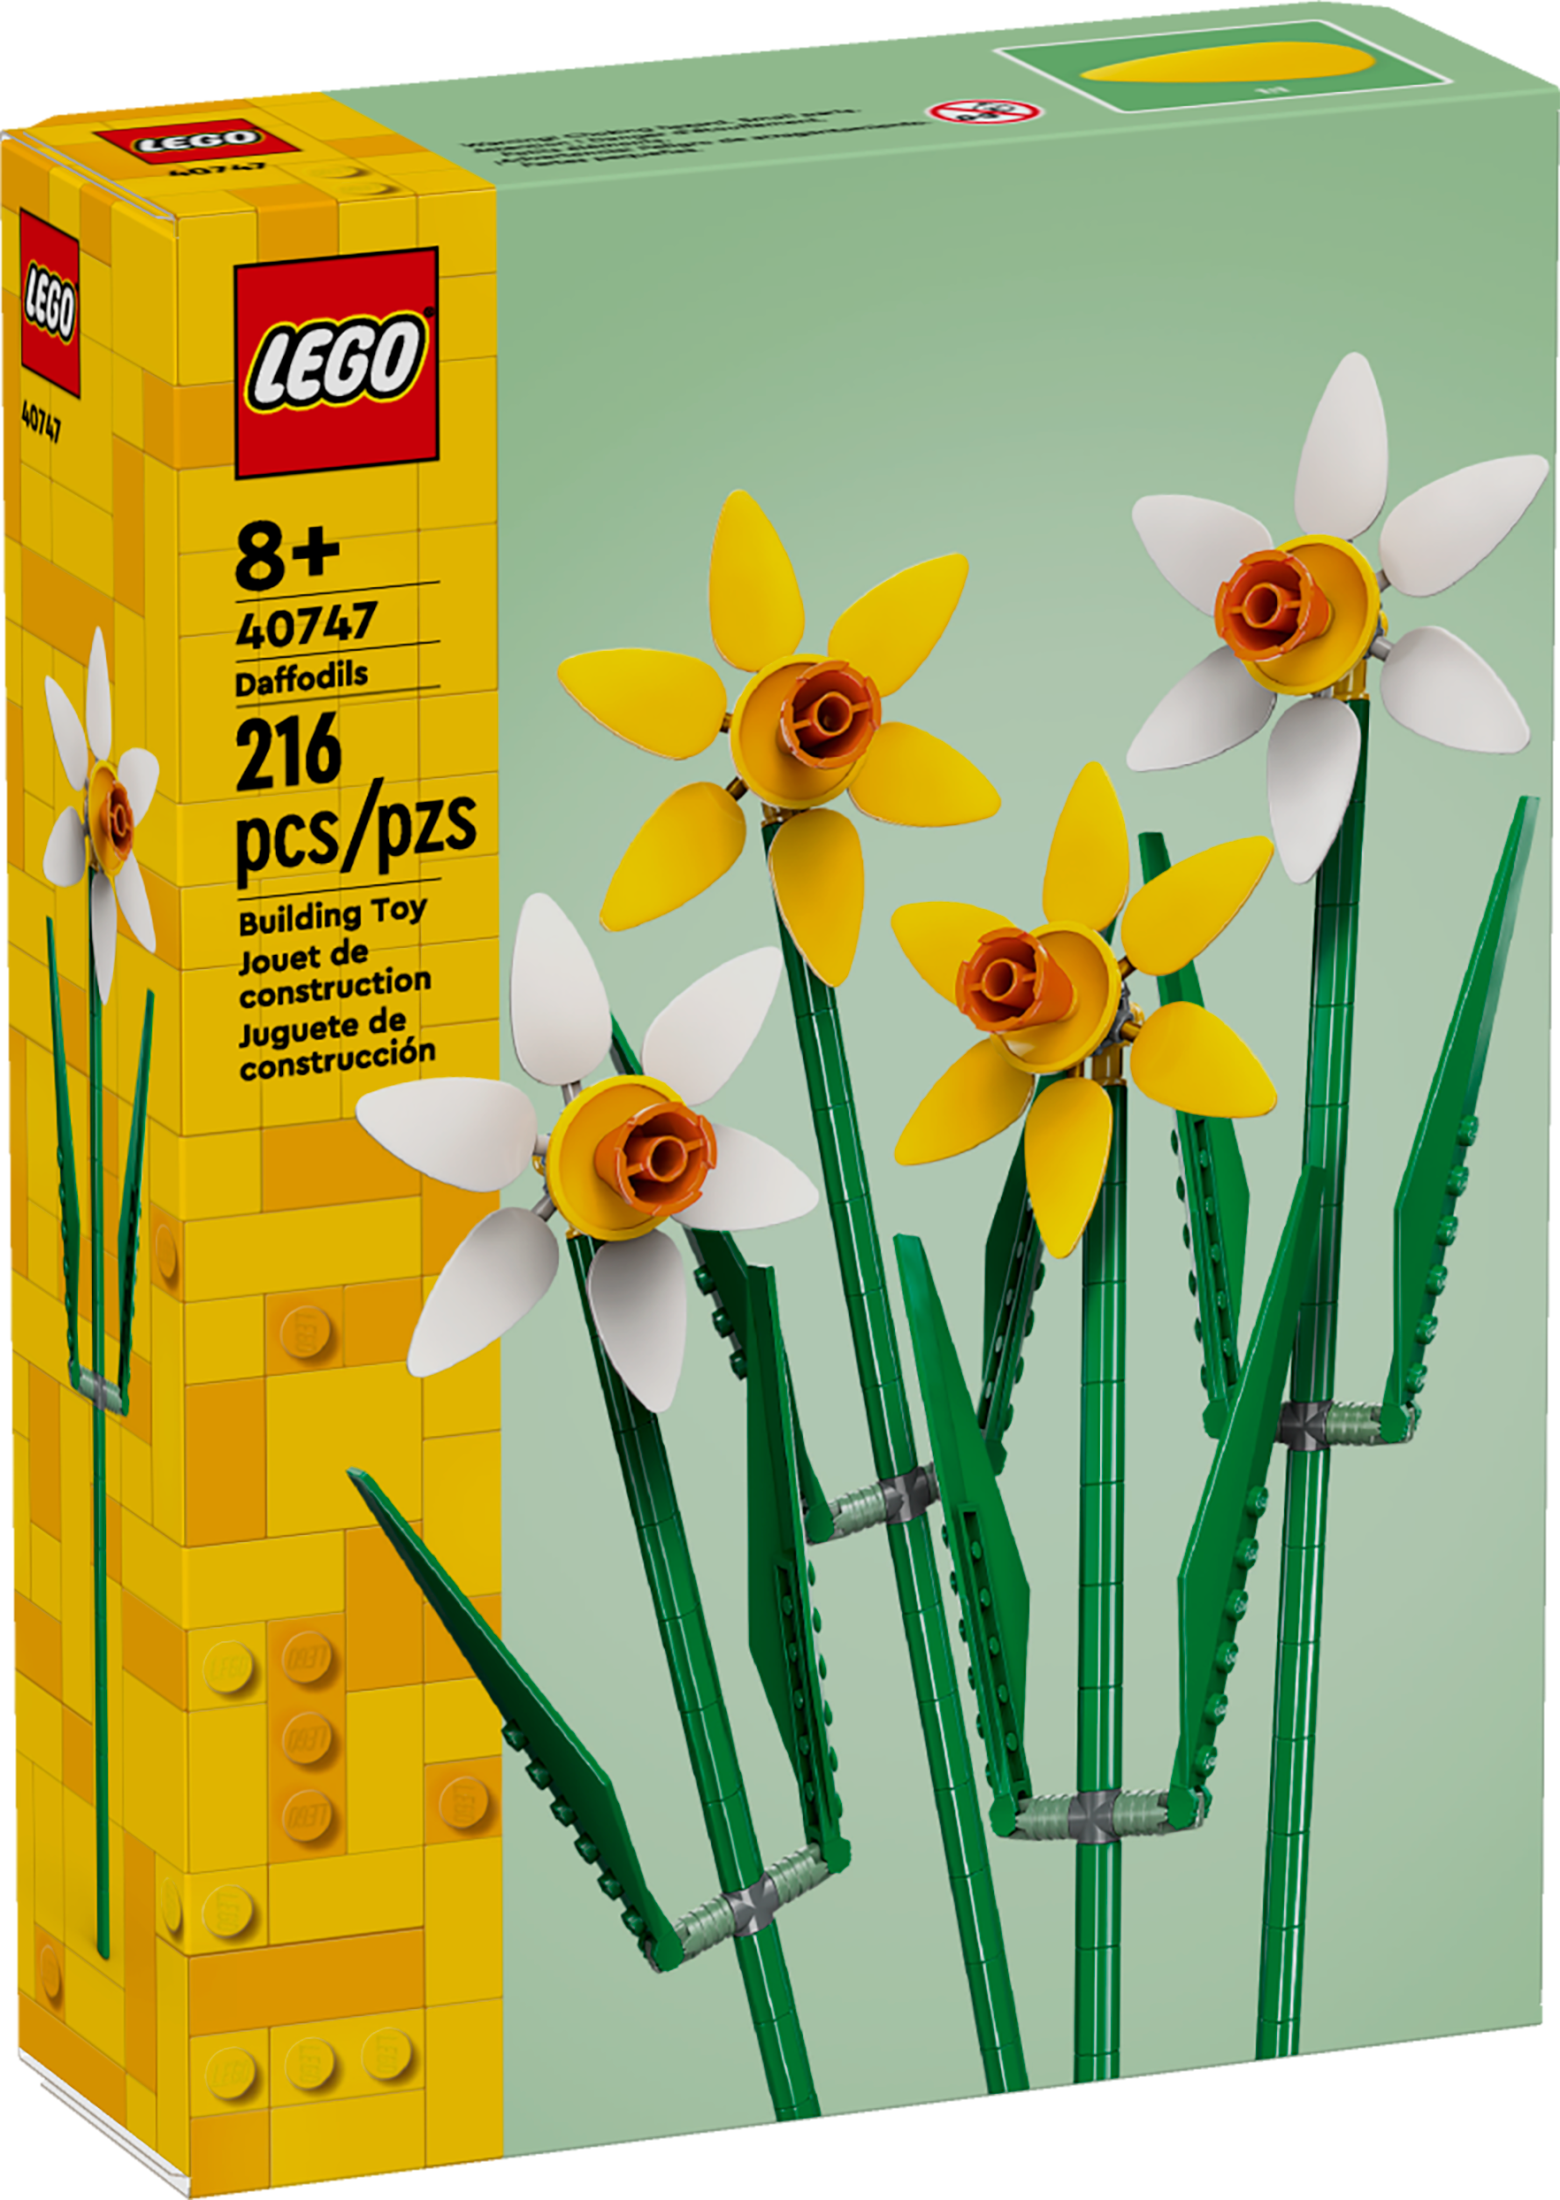 LEGO Daffodils Celebration Gift, Yellow and White Daffodils, Spring Flower Room Decor, Great Gift for Flower Lovers, 40747 - image 3 of 8